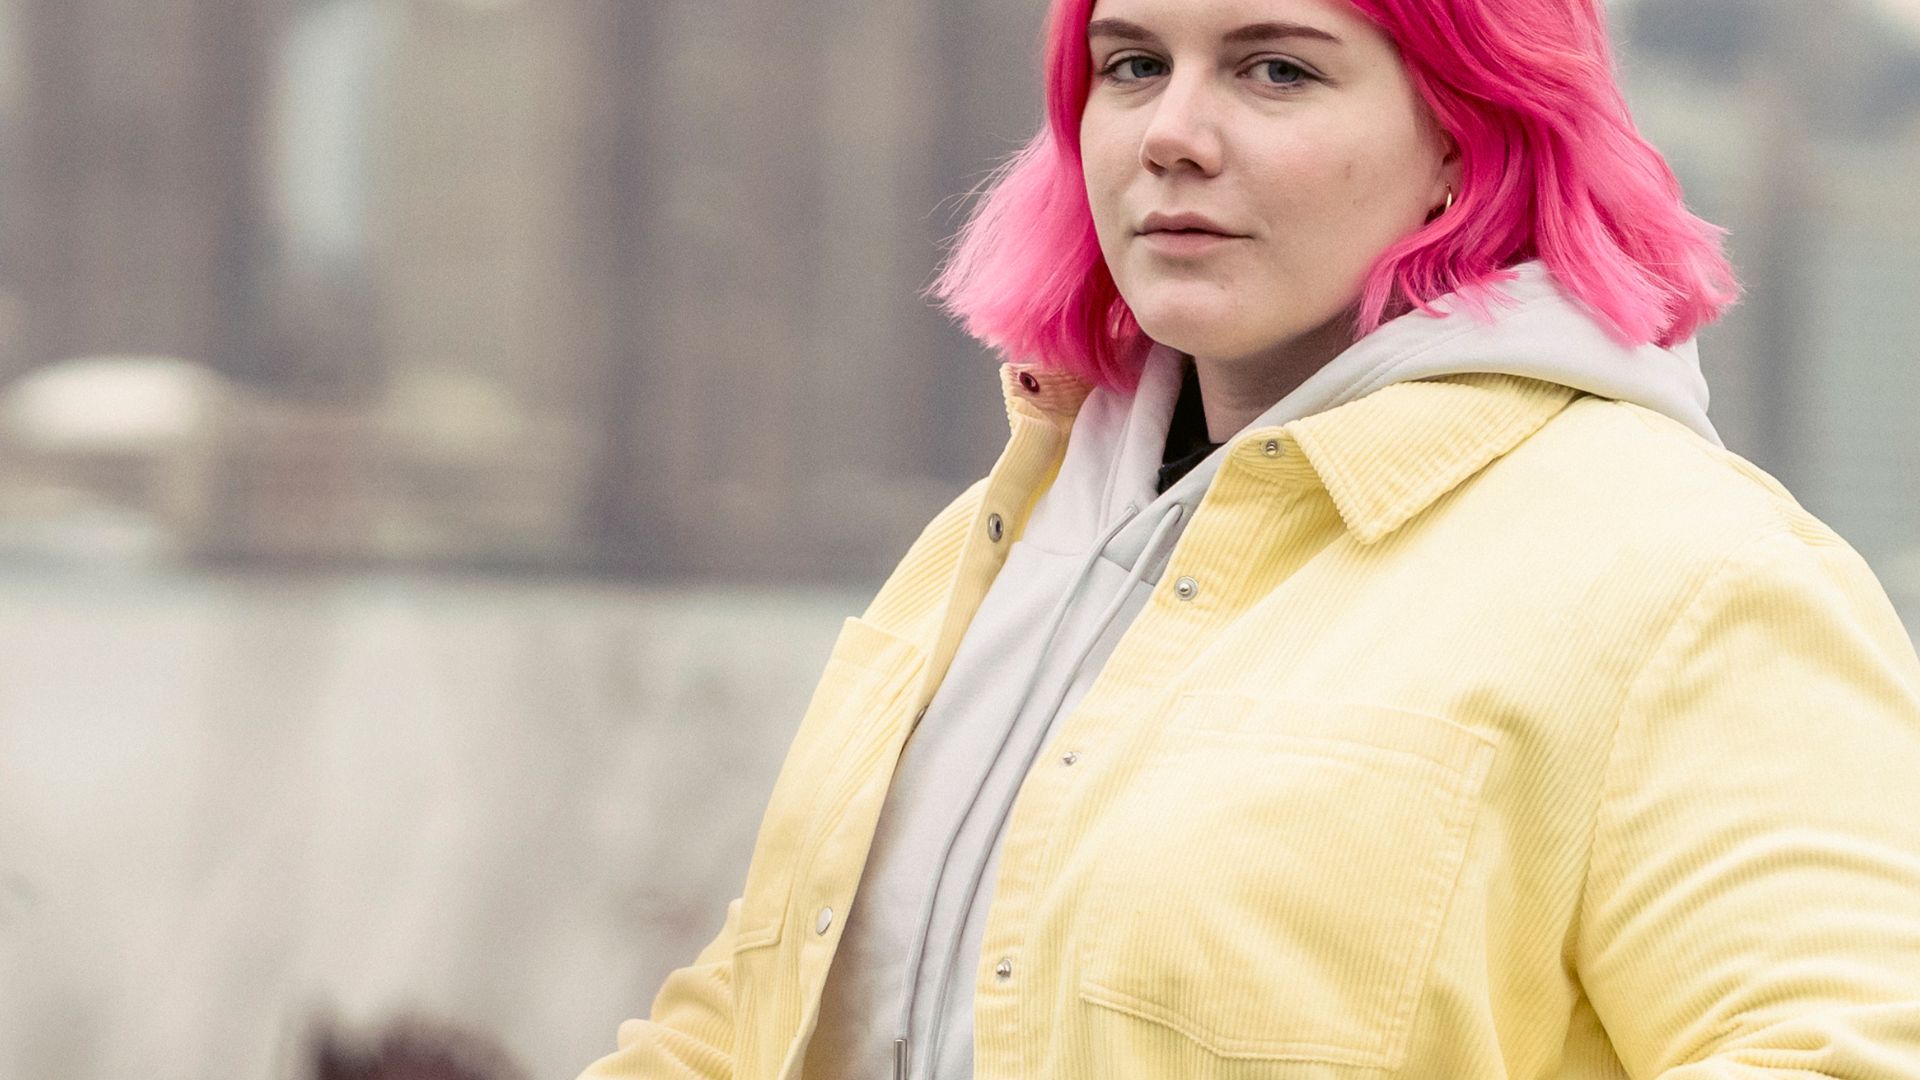 A Woman with Colored Hair Wearing a Yellow Jacket